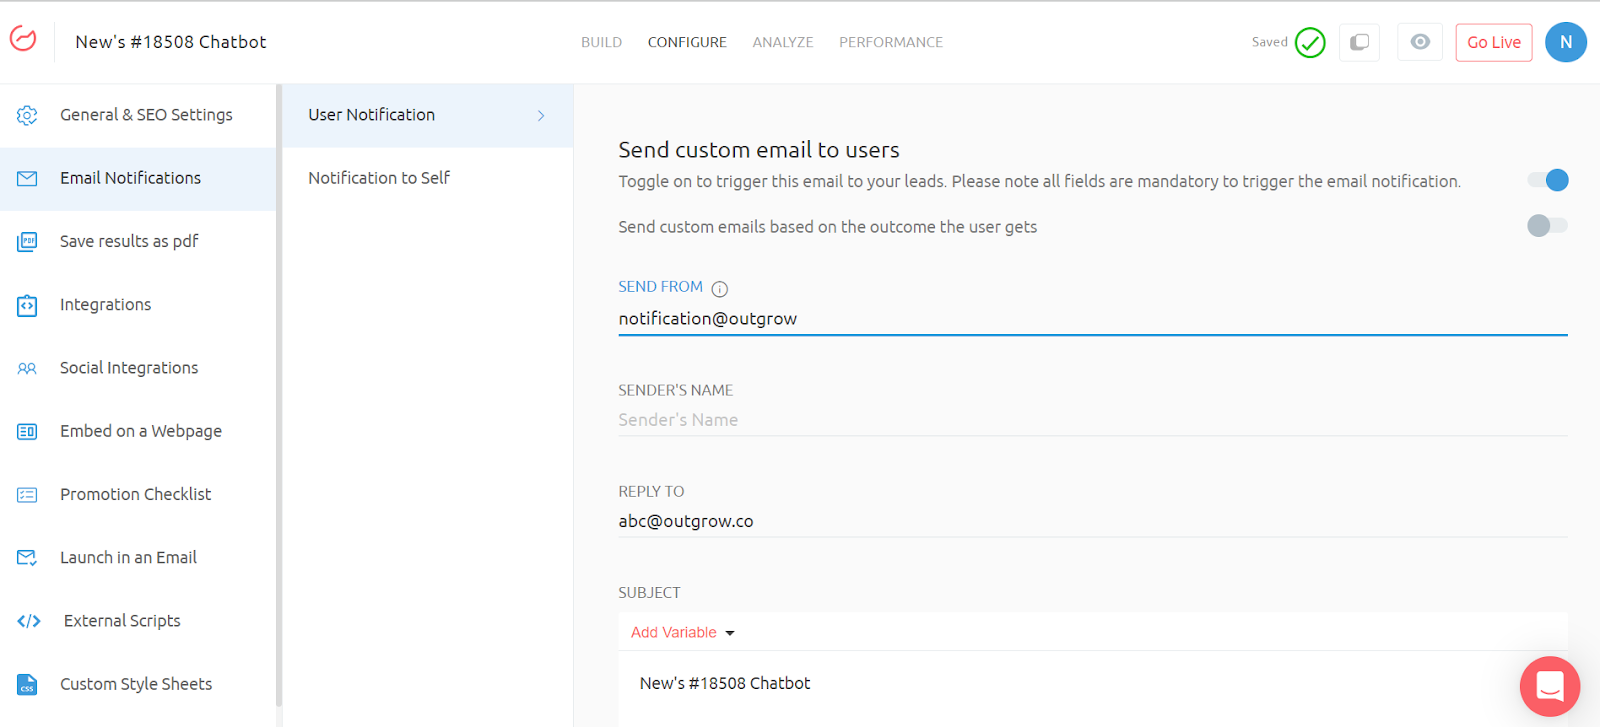 Email configuration feature of Outgrow's chatbot builder